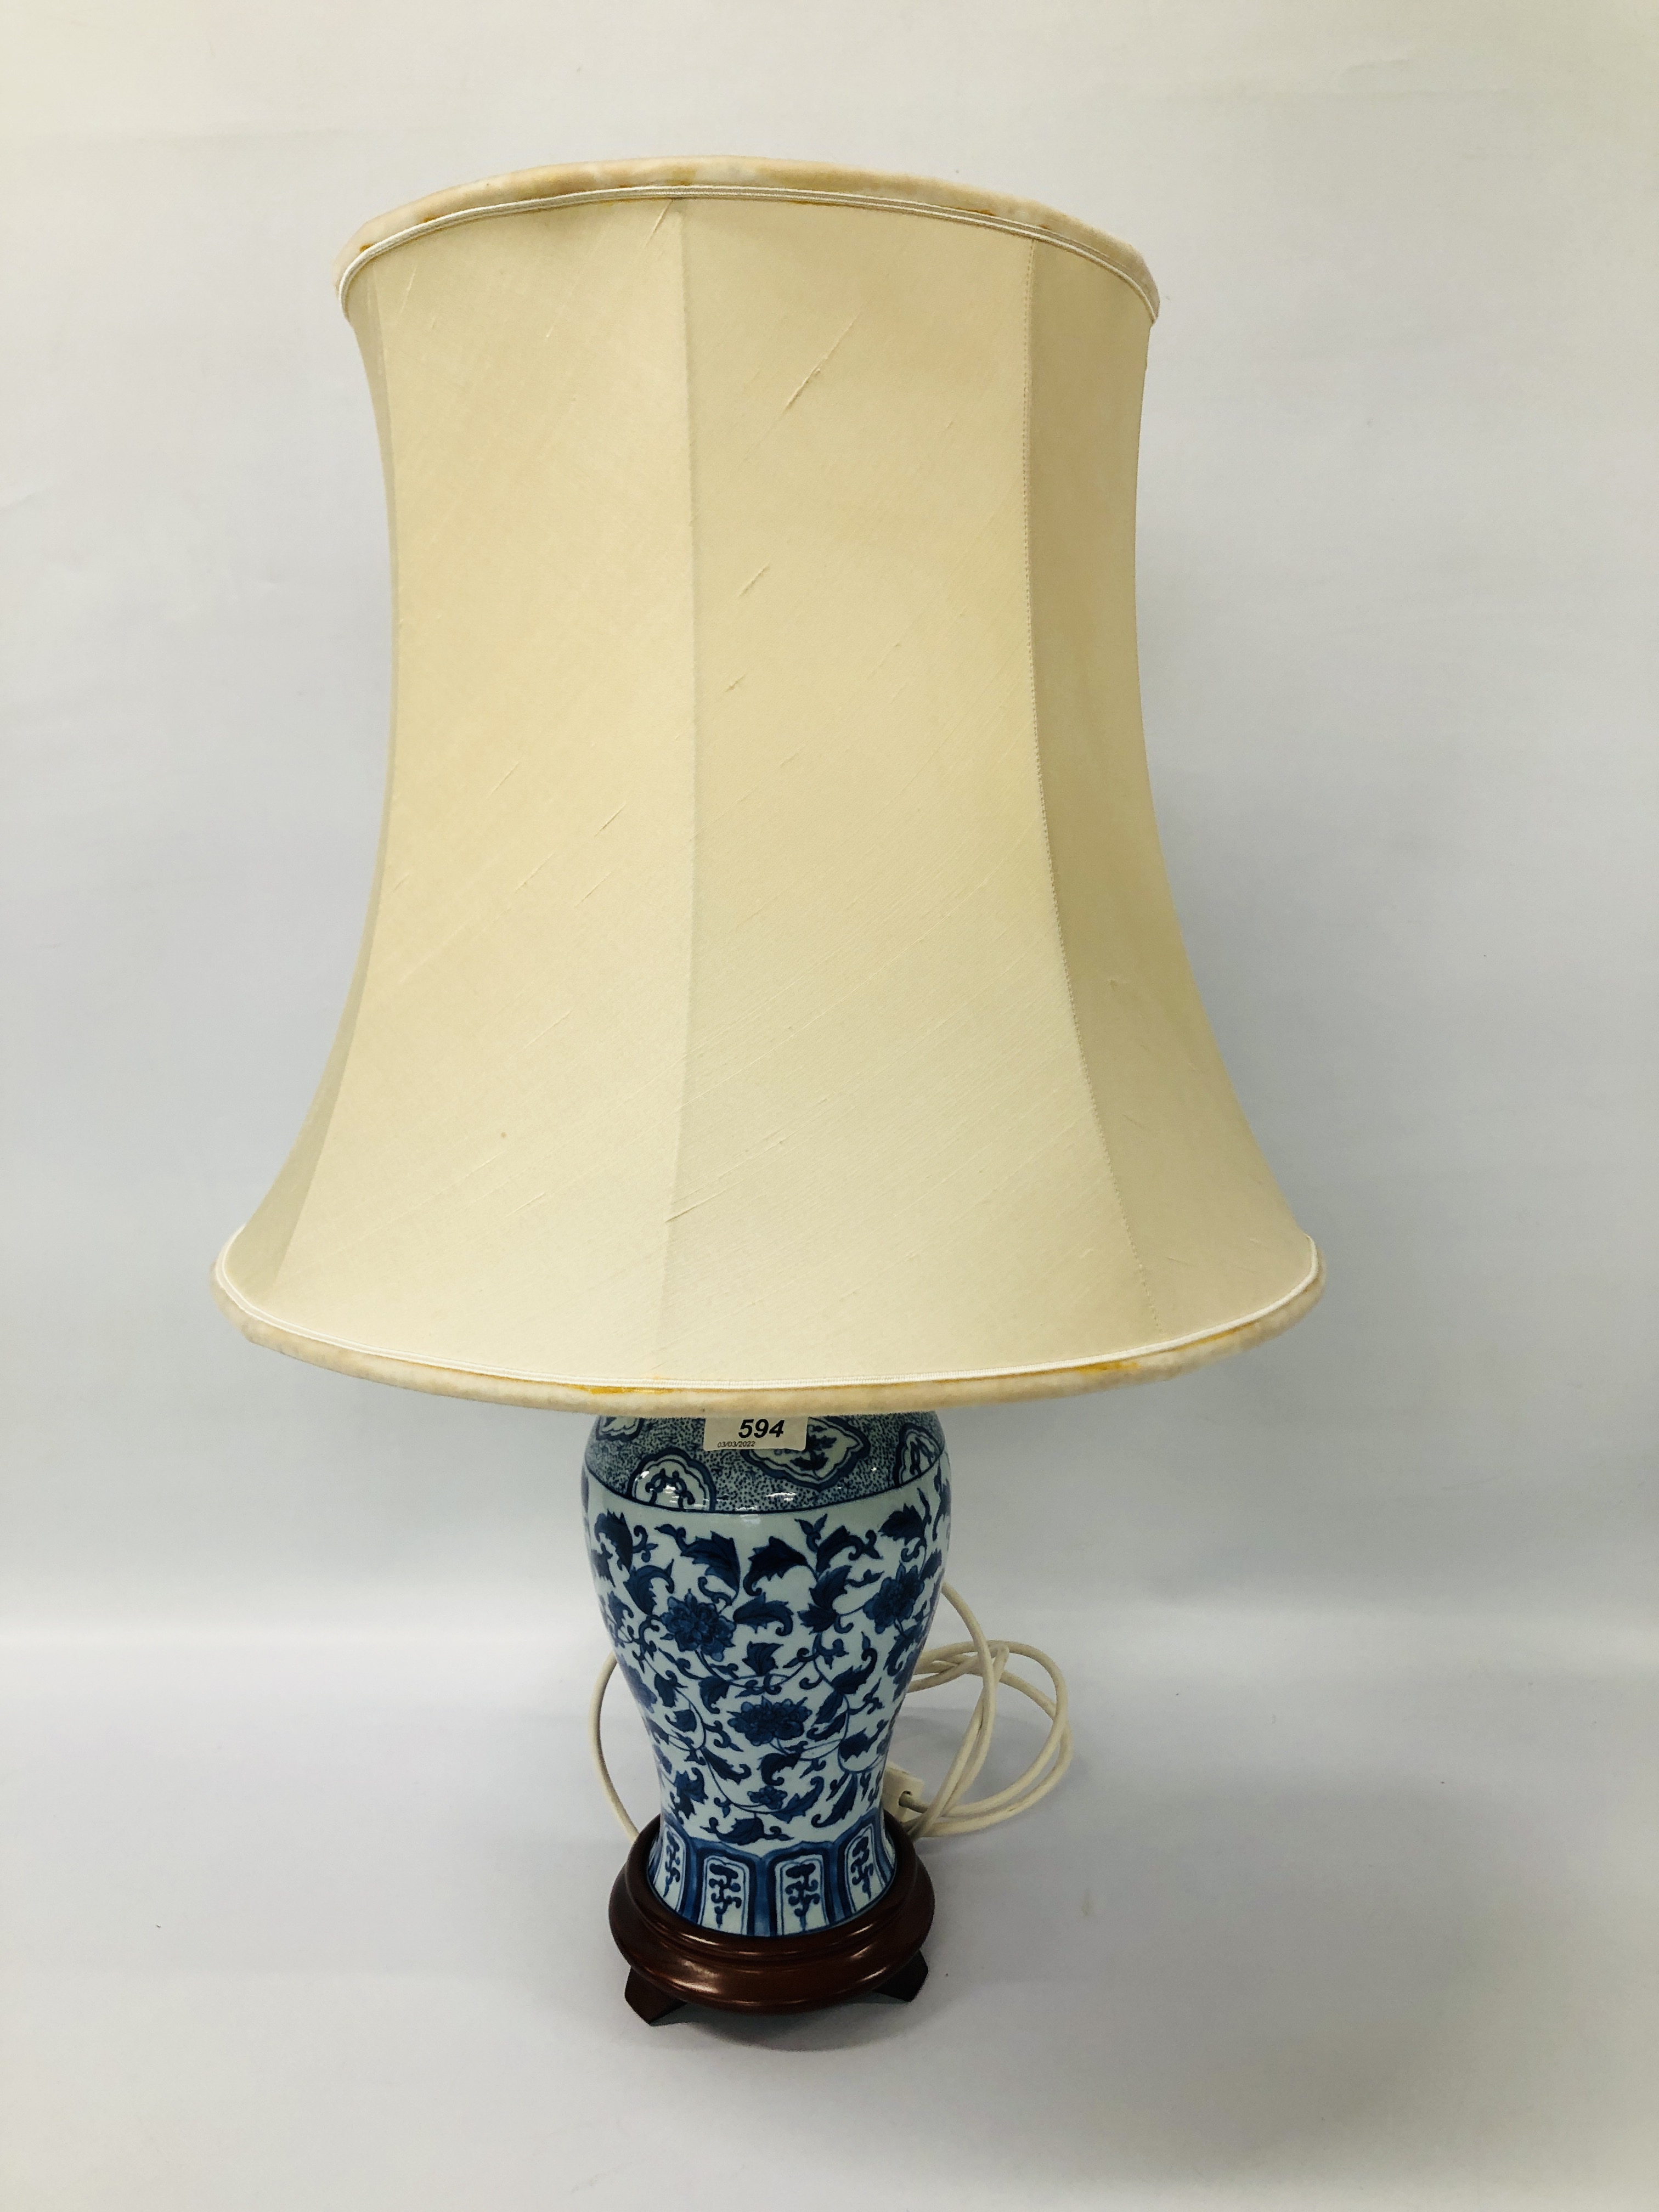 3 X TABLE LAMPS TO INCLUDE BLUE AND WHITE ORIENTAL DESIGN ALL HAVING SHADES + A SONY CD RADIO - Image 5 of 5